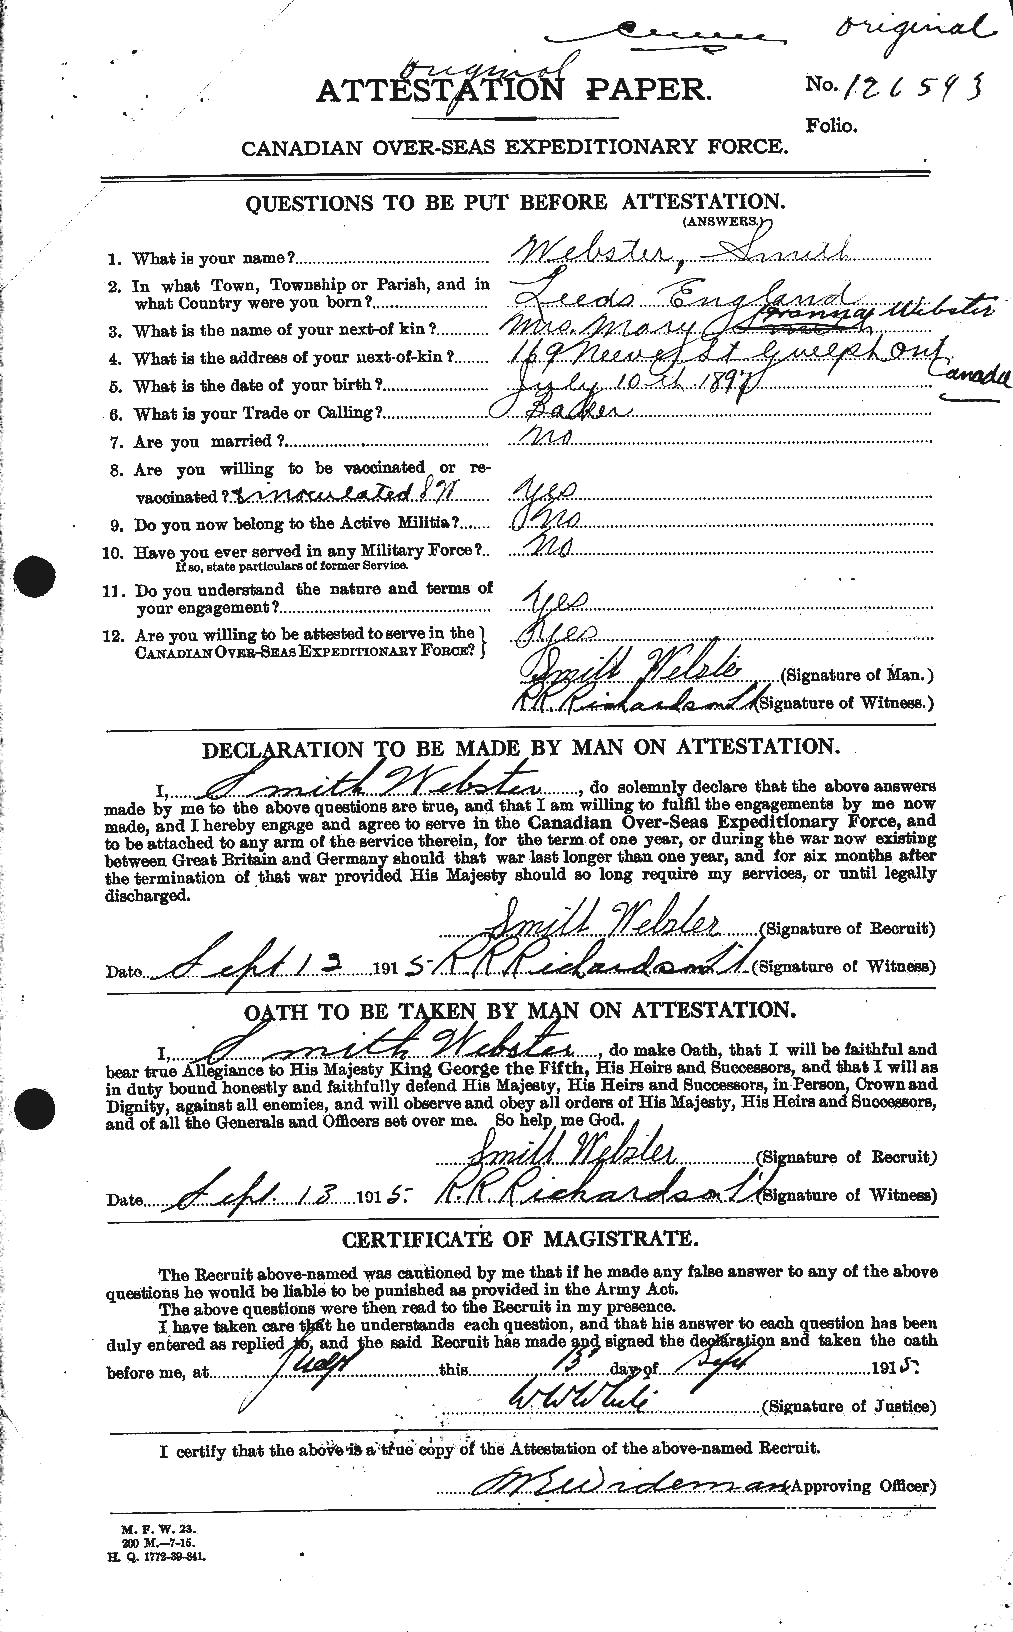 Personnel Records of the First World War - CEF 661978a